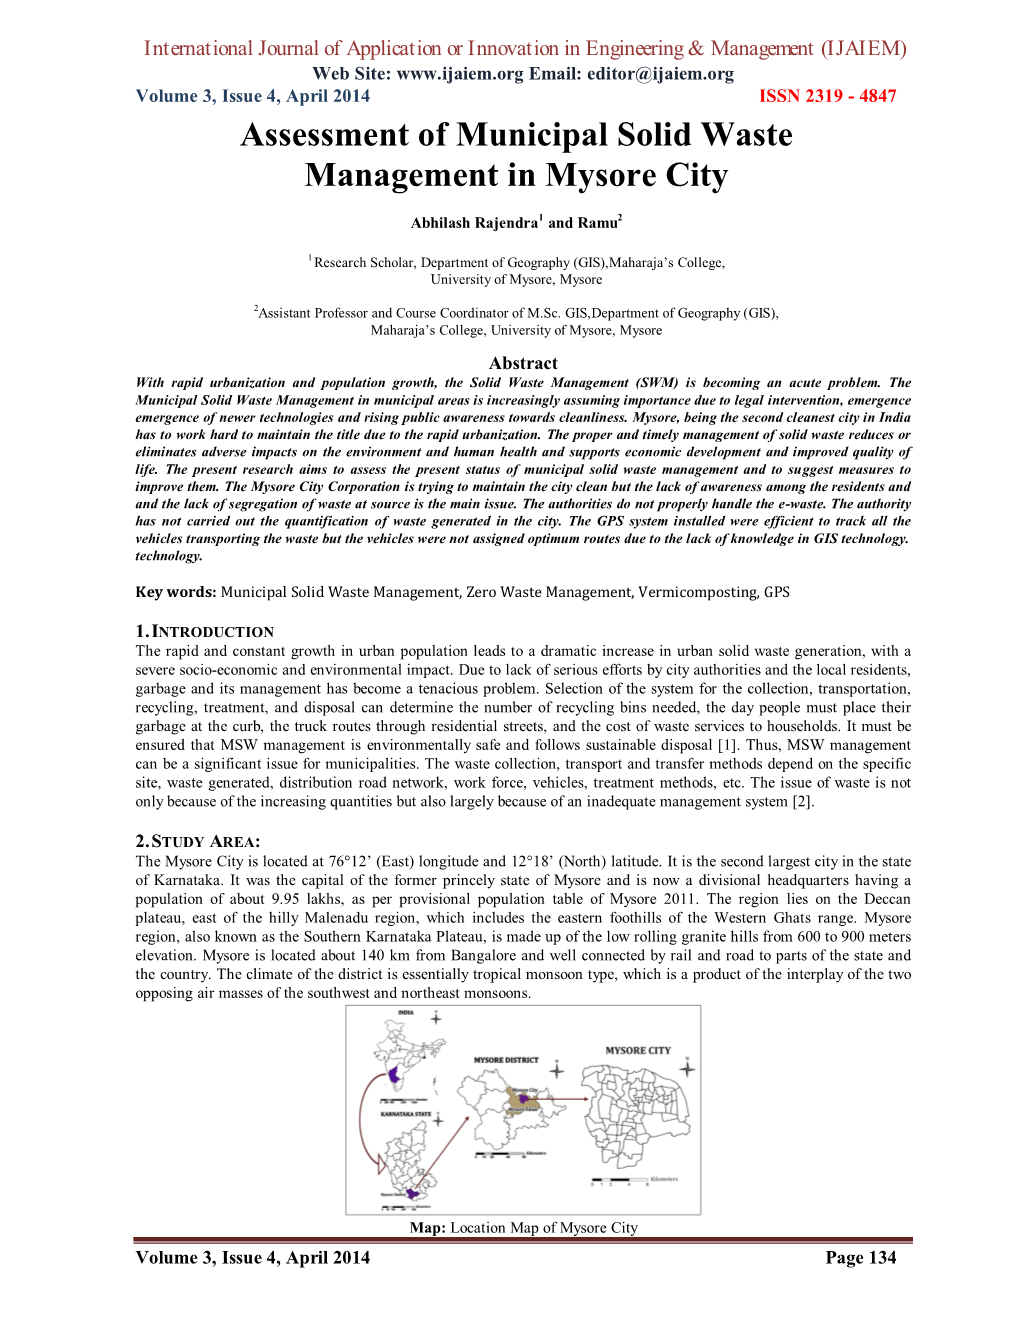 Assessment of Municipal Solid Waste Management in Mysore City